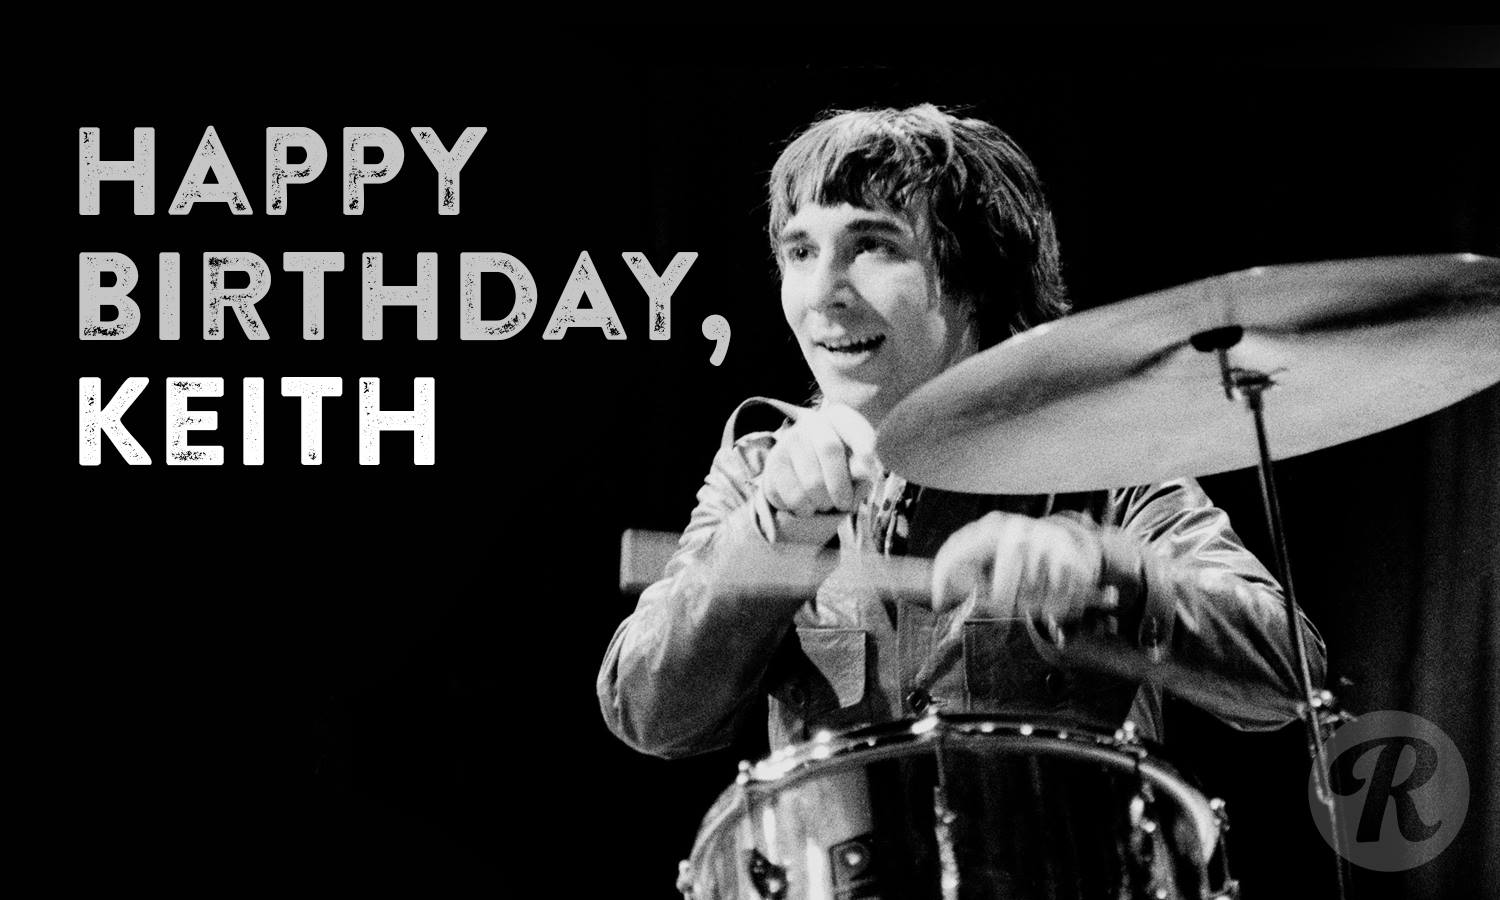 Happy birthday Keith Moon! One of the greatest drummers of all time. Few have gone harder before or since you left us 